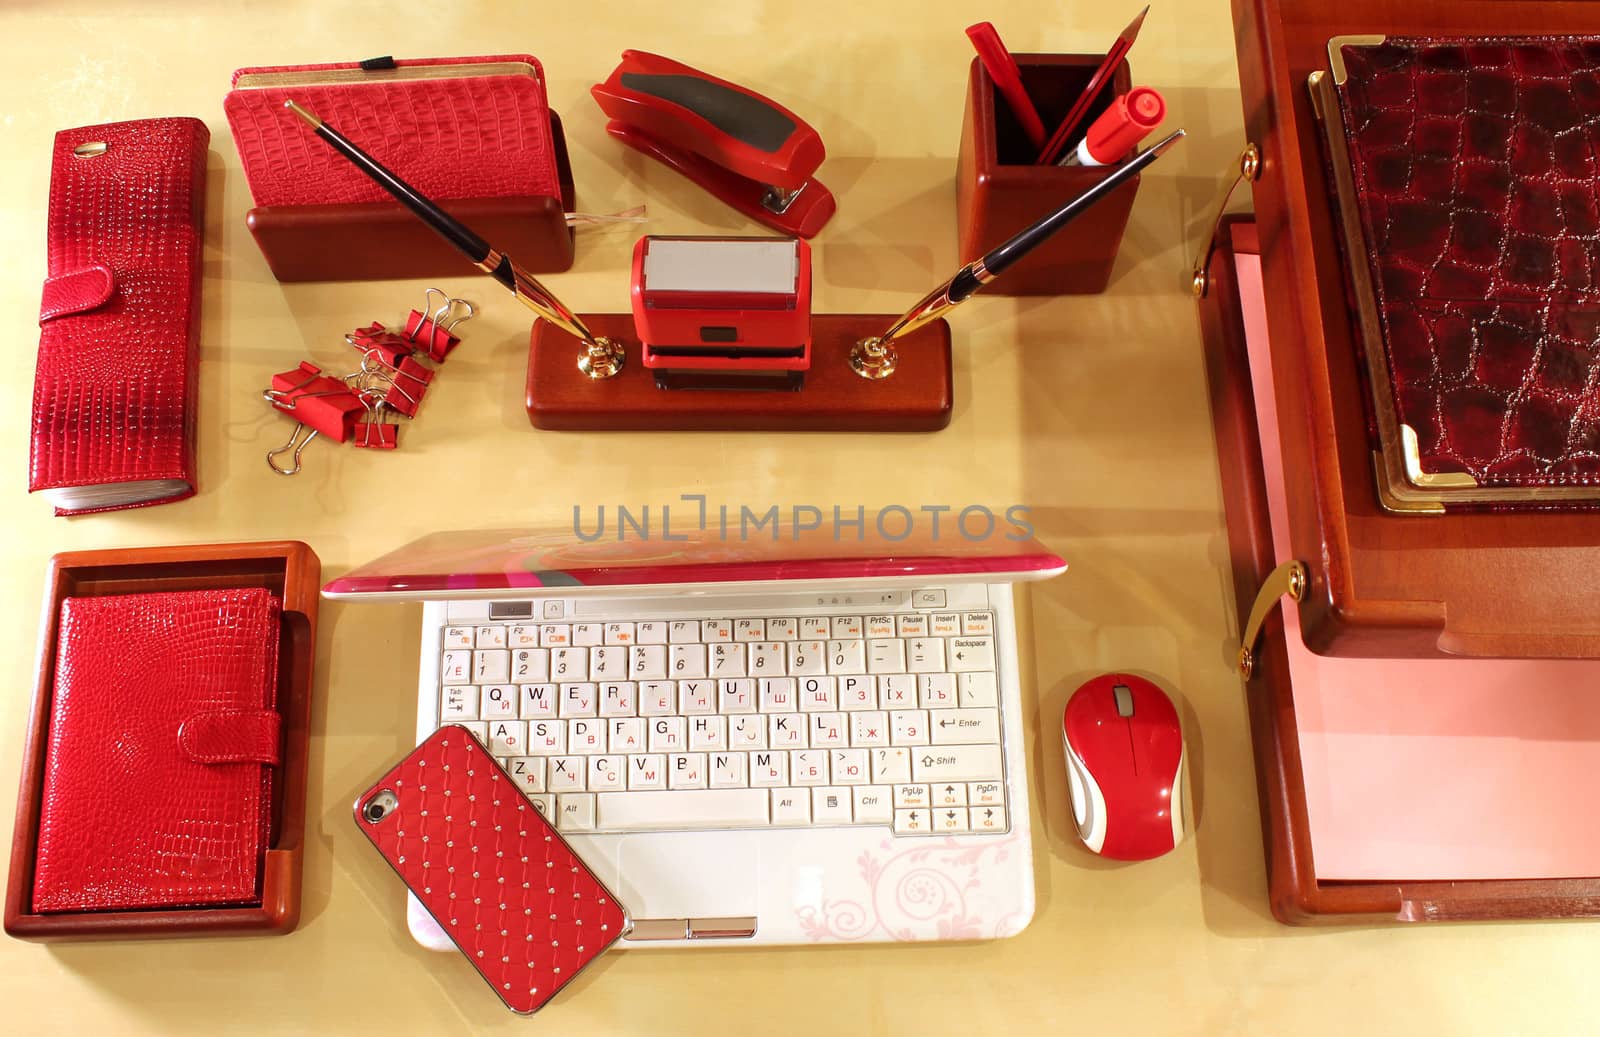 Computer, mobile phone, paper tray and stationery in red color scheme